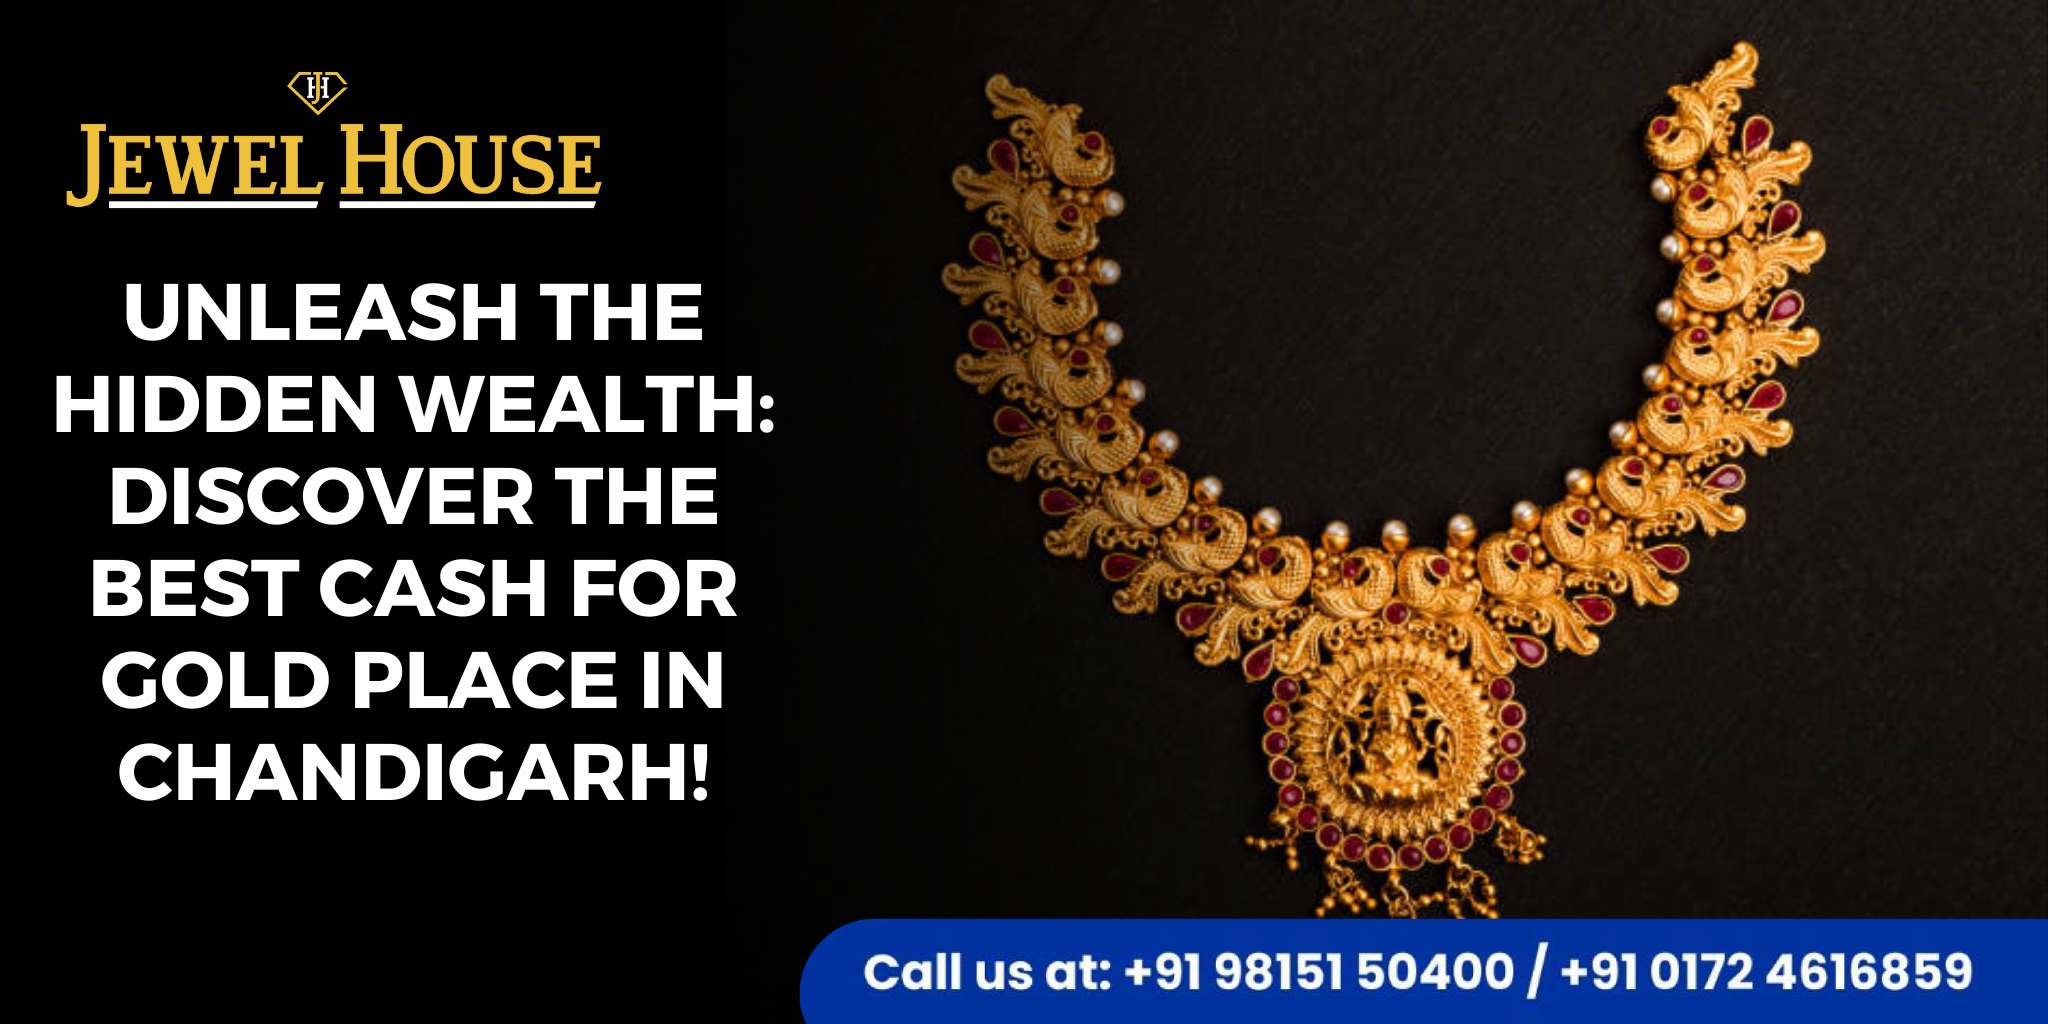 cash for gold place in chandigarh